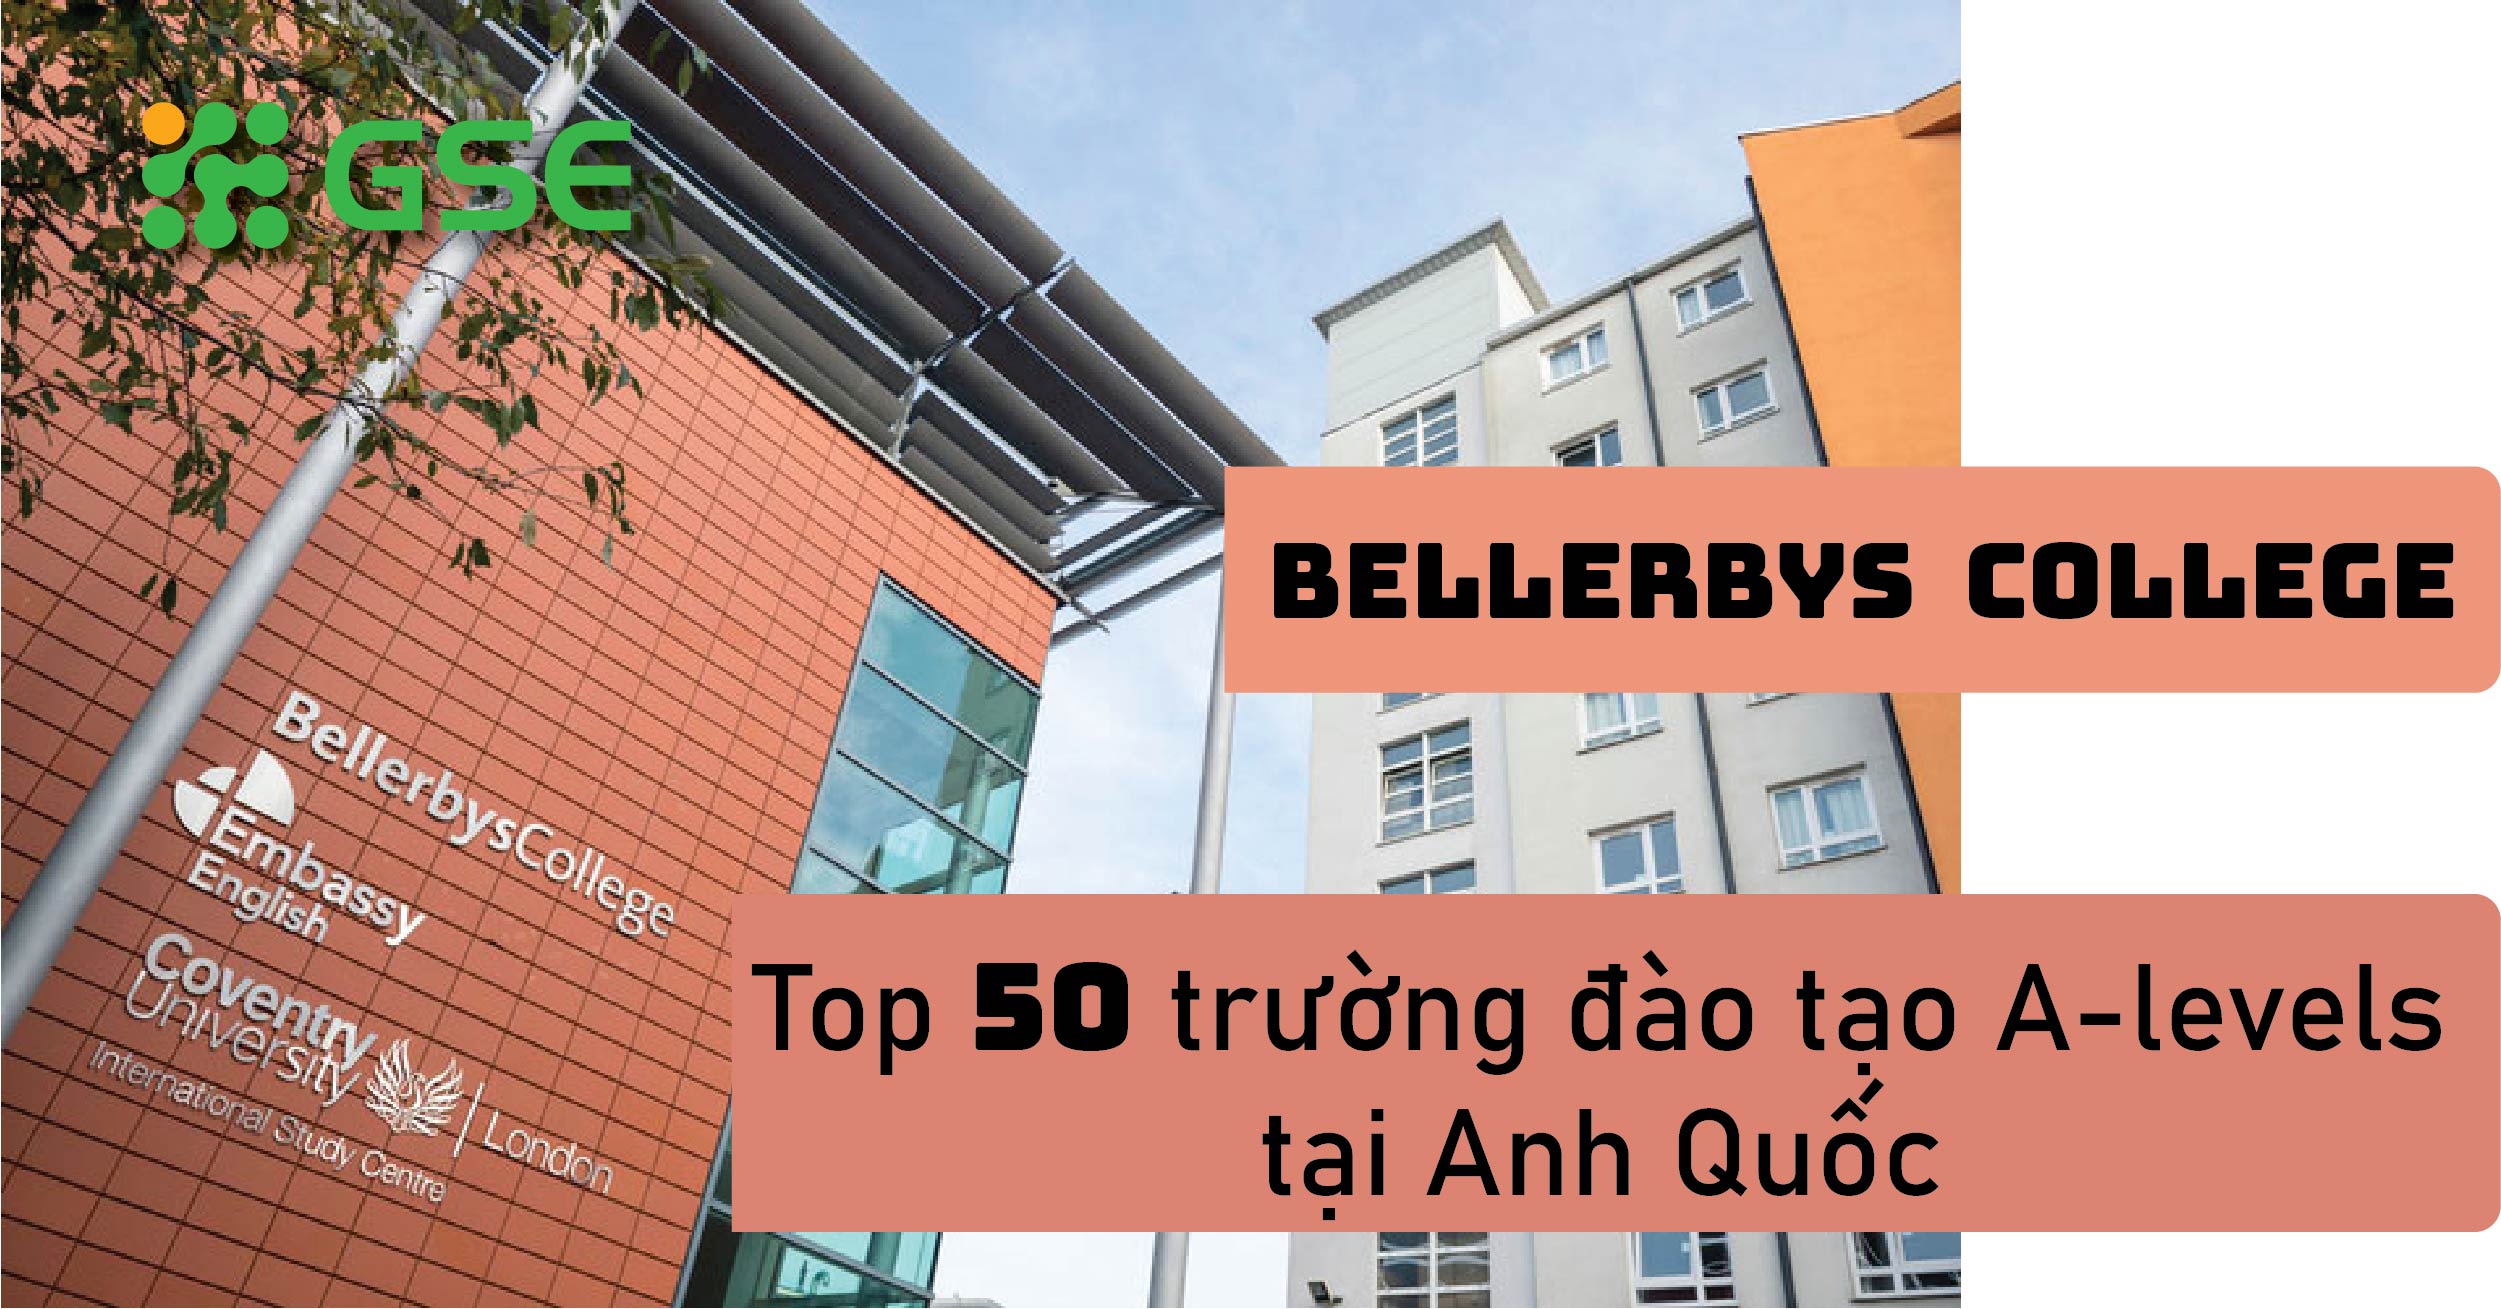 Bellerbys College tai anh quoc 02